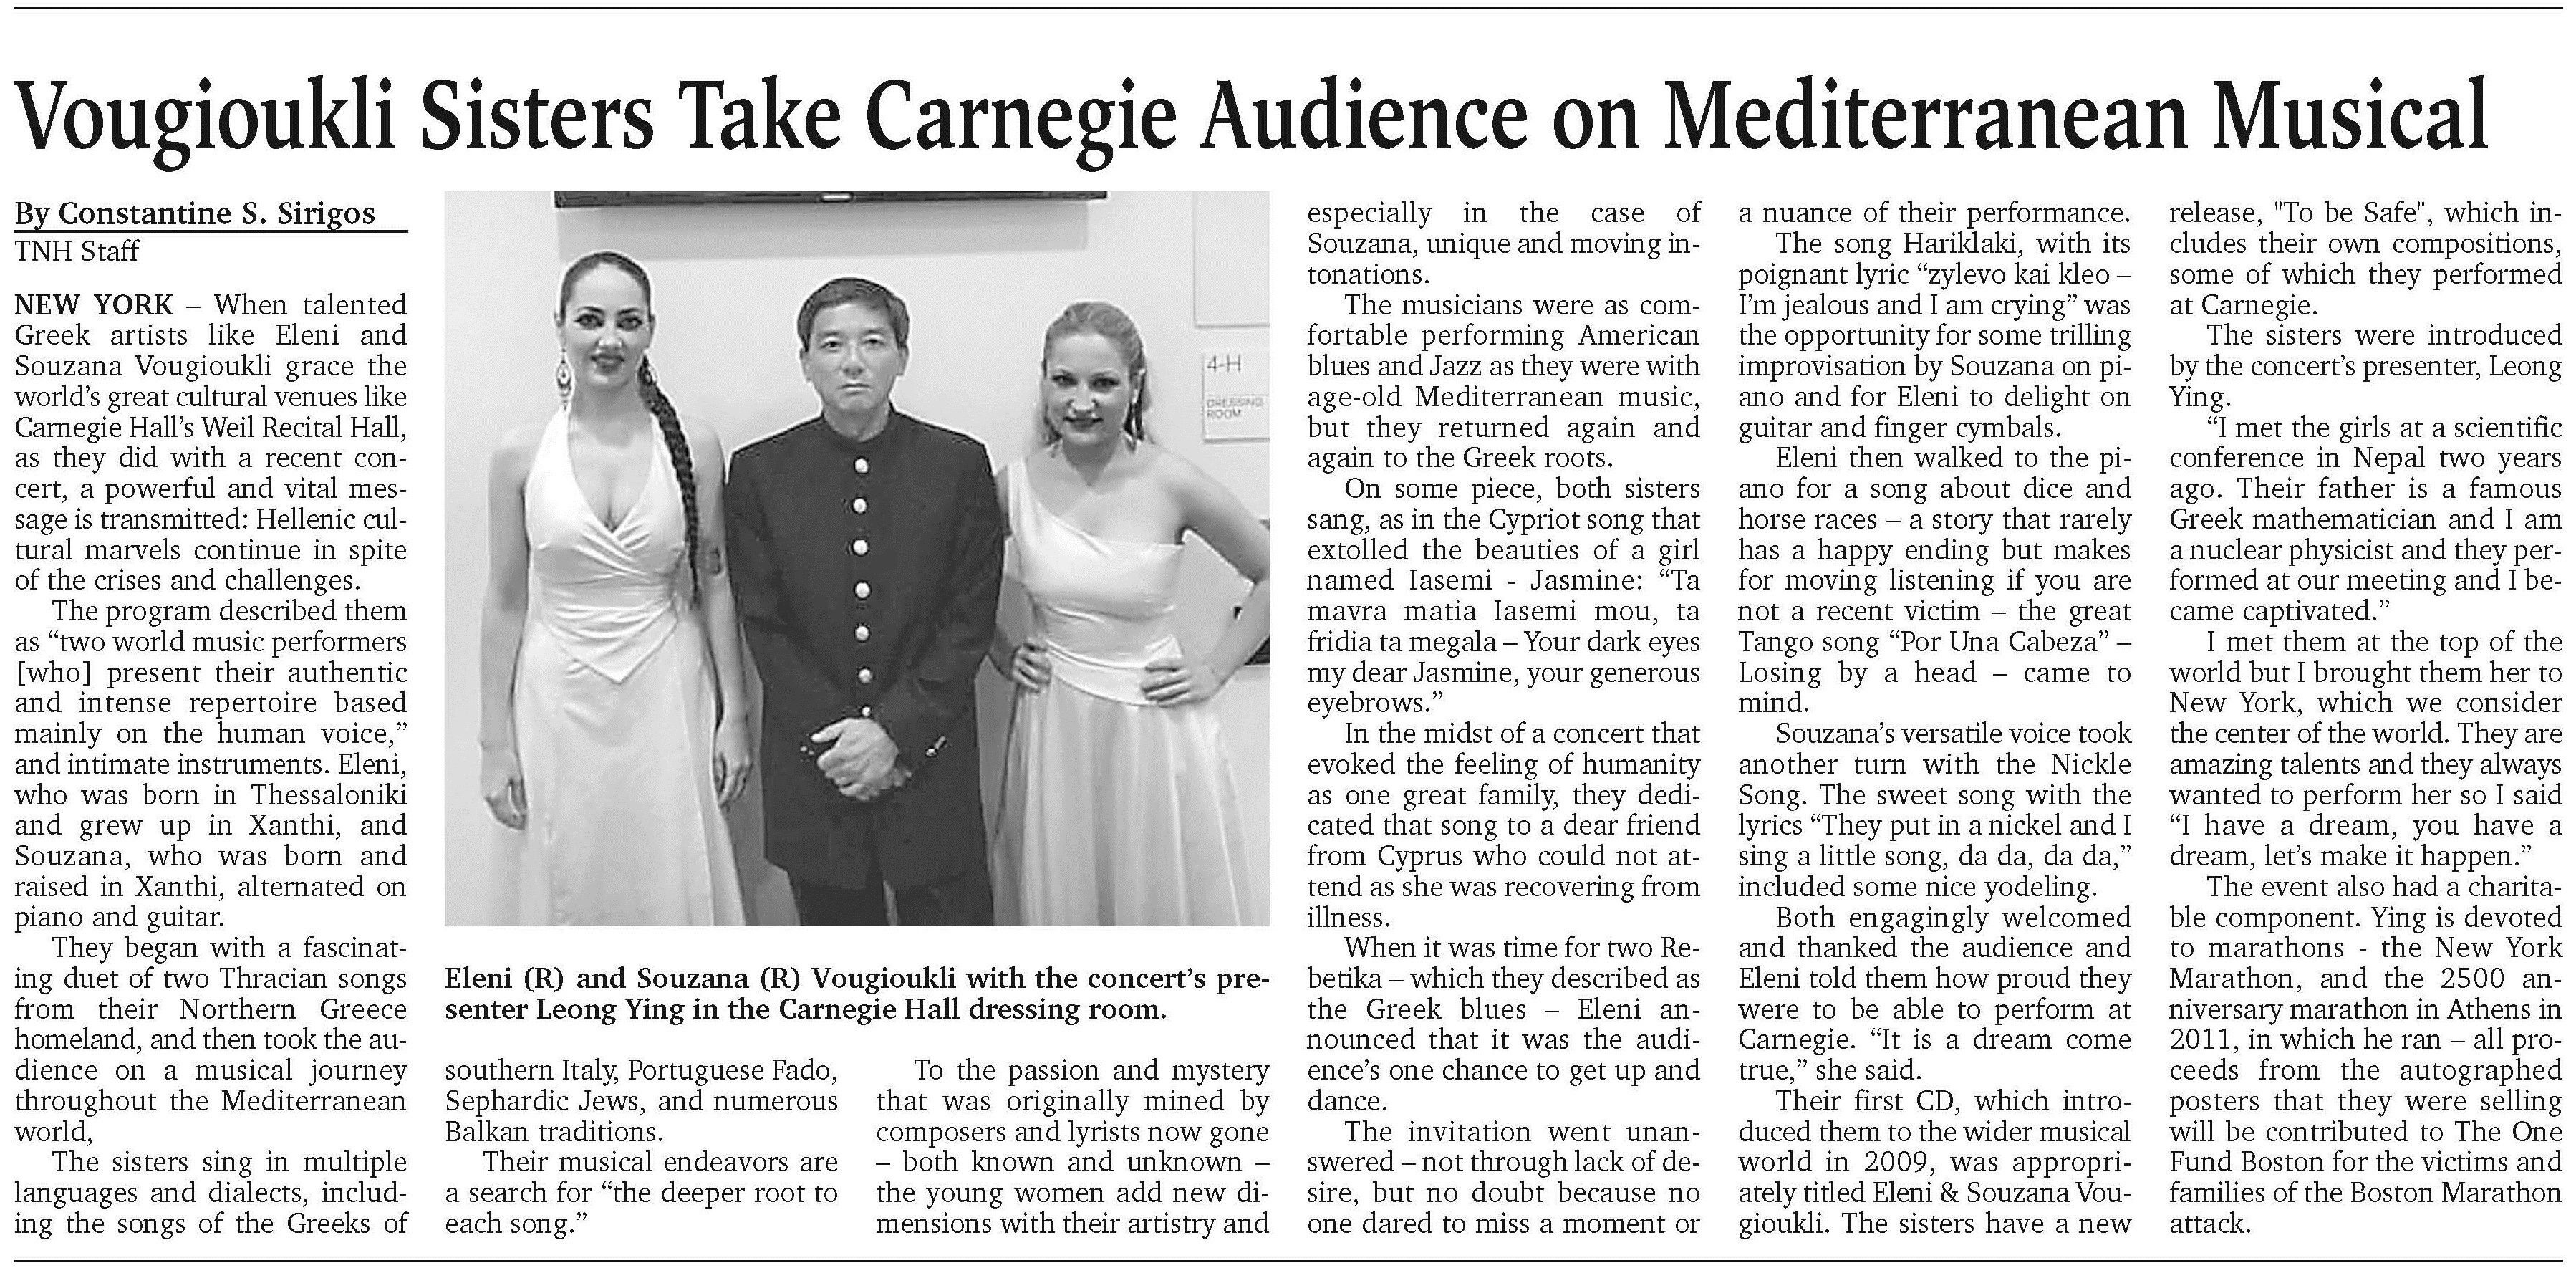 2013 The National Herald - Carnegie Hall Musical Production